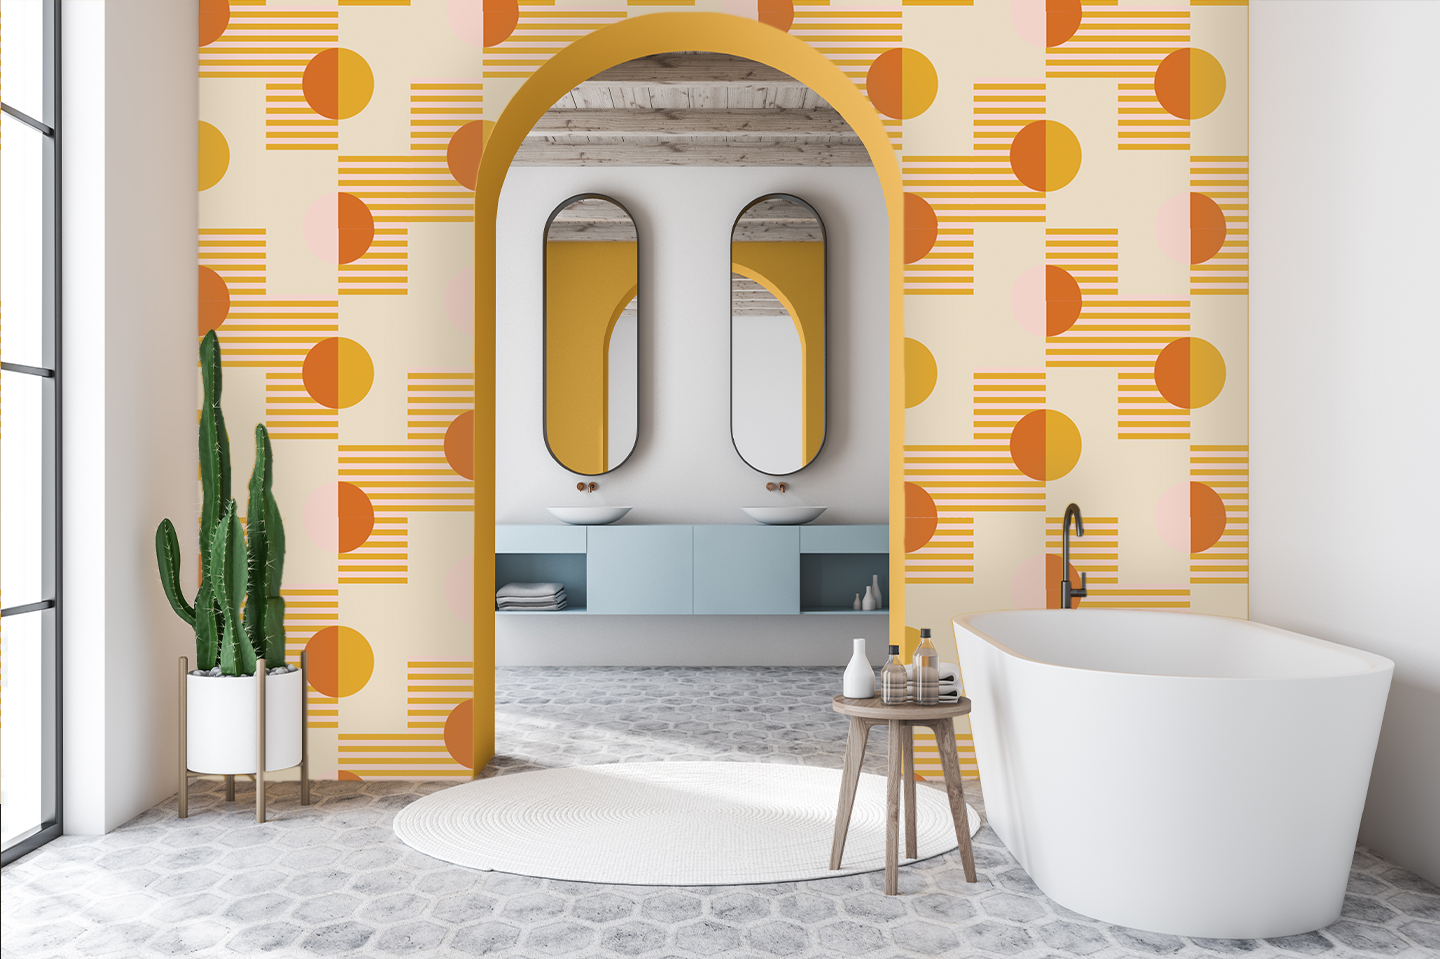 Summer Suns Removable Fabric Wallpaper Peel And Stick Multiple